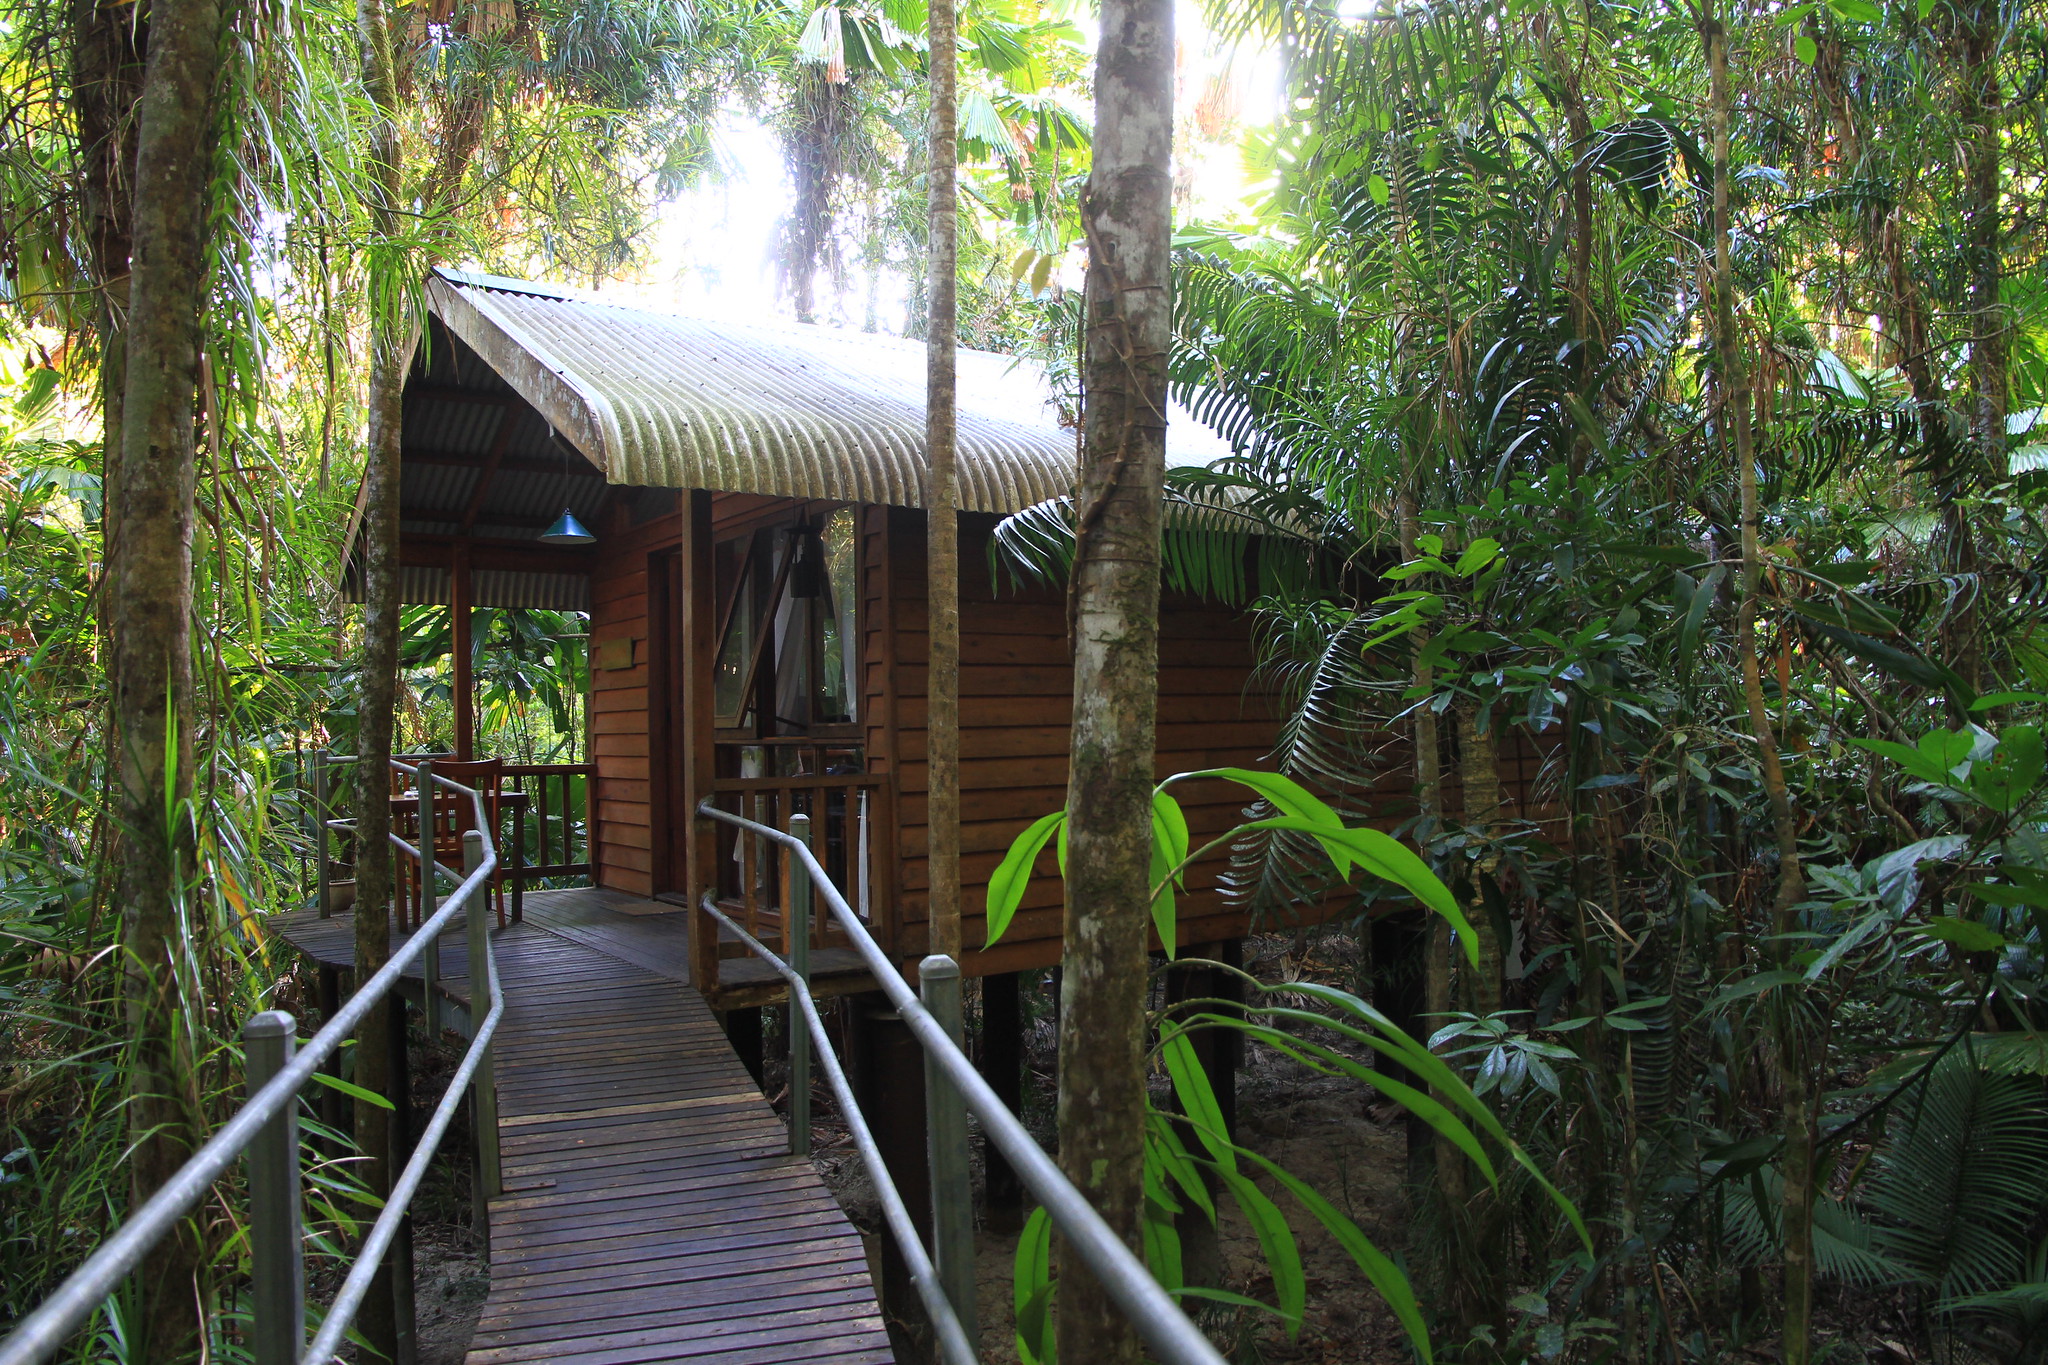 <p>At the Daintree Wilderness Lodge, you’ll stay in <strong>treehouse villas</strong> that ensure a minimal impact on the surrounding ecosystem. Activities at the lodge include hiking tours through the ancient forests, and painting workshops featuring pigments made from local ocher. </p>  <p>The Great Barrier Reef Marine Paark is also nearby (less than an hour) for those looking to explore one of the world’s best places to dive.</p>